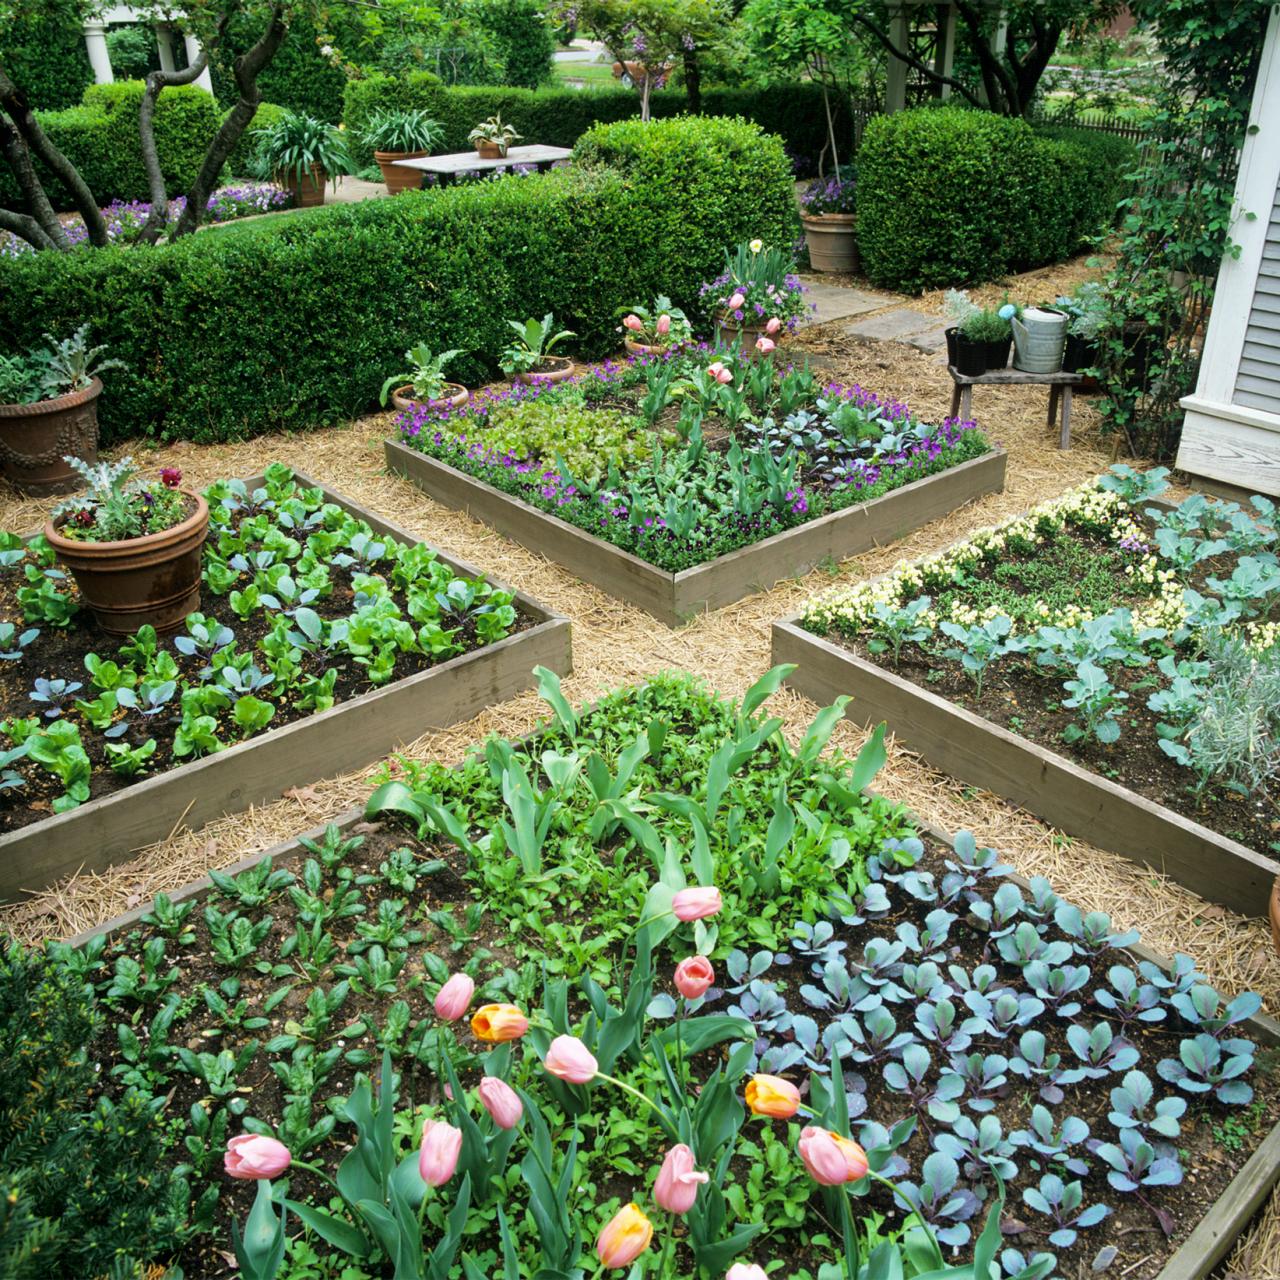 https://hgtvhome.sndimg.com/content/dam/images/grdn/fullset/2013/1/20/0/CI_intensive-gardening-allows-a-lot-of-produce-to-grow-in-a-small-space.jpg.rend.hgtvcom.1280.1280.suffix/1452644679836.jpeg